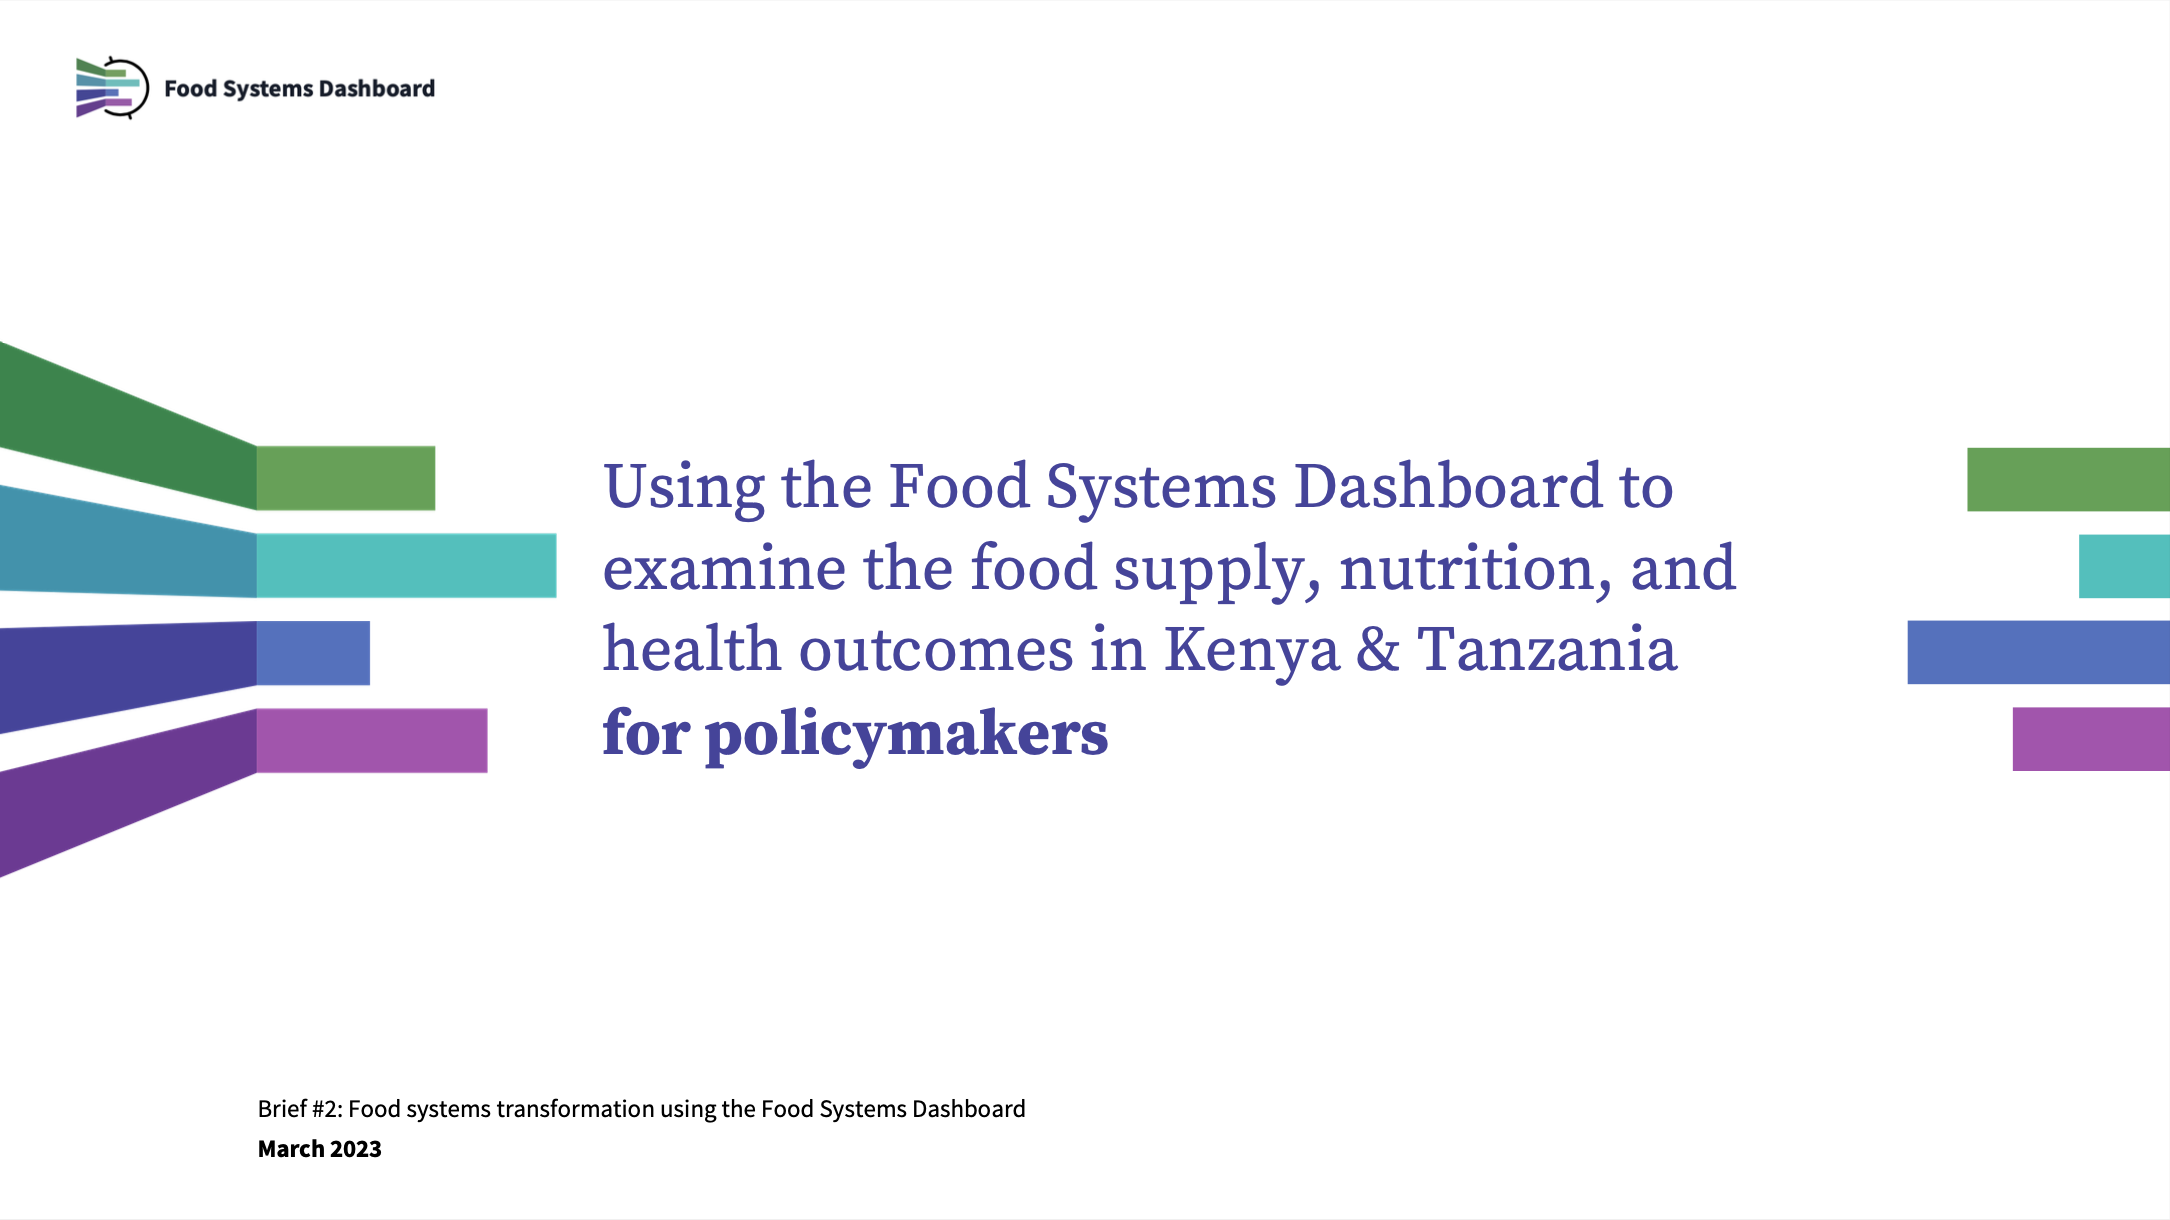 Using the Food Systems Dashboard to examine the food supply, nutrition, and health outcomes in Kenya & Tanzania